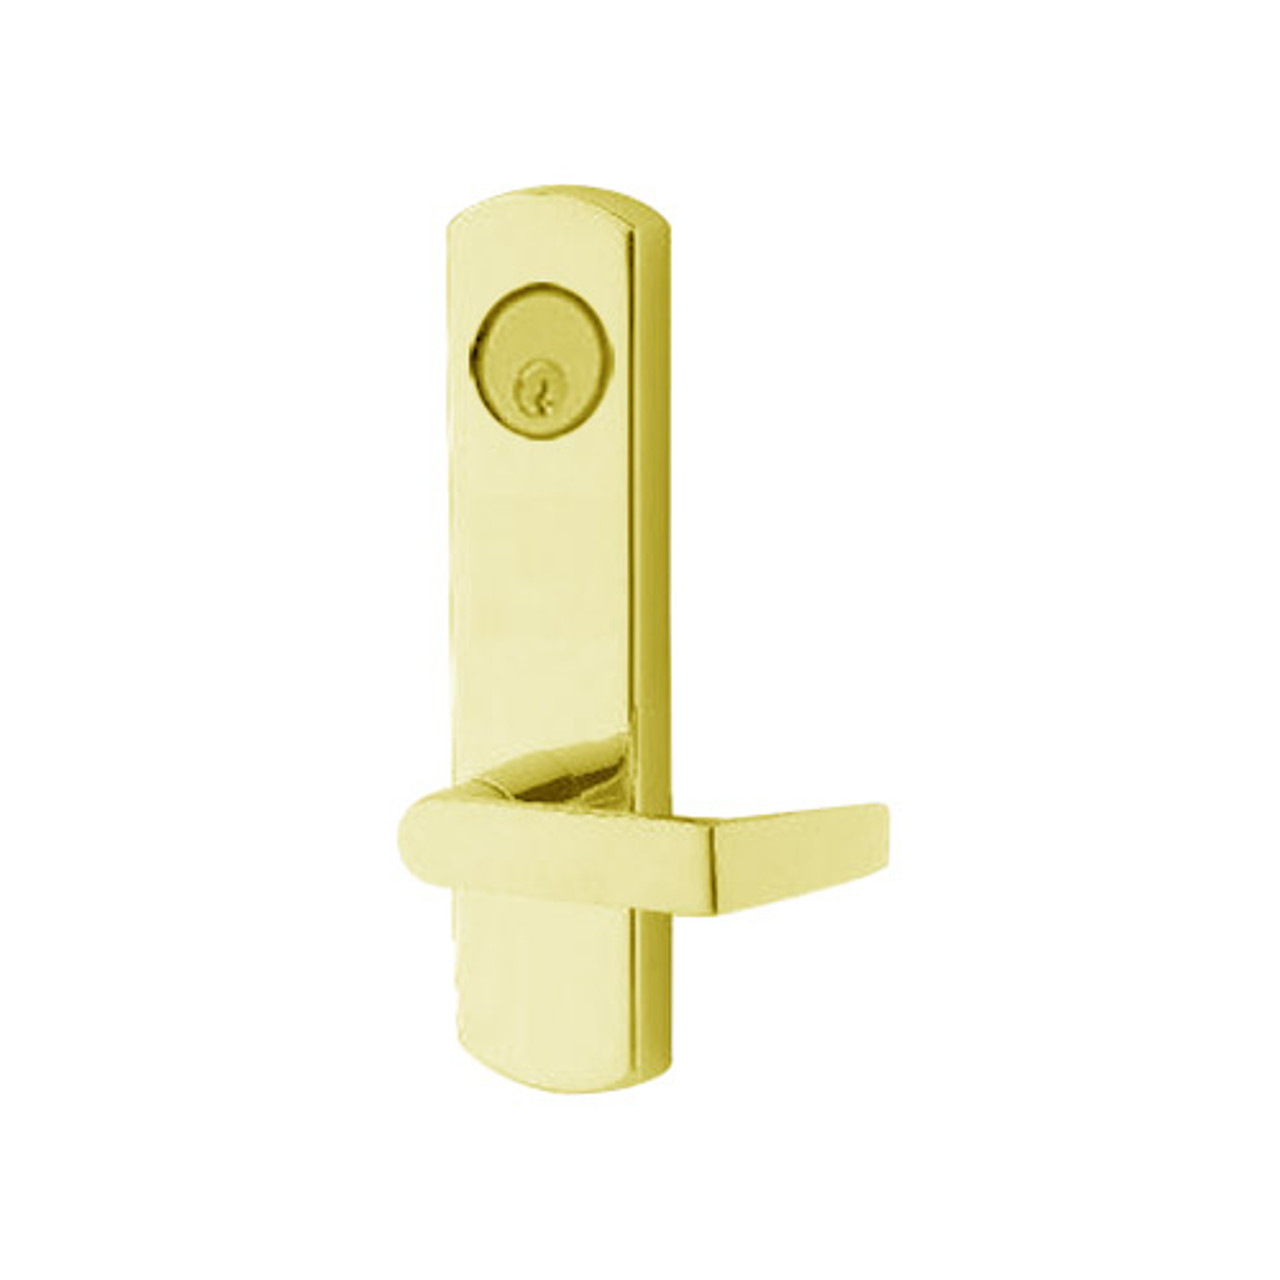 3080E-03-0-93-30 US3 Adams Rite Electrified Entry Trim with Square Lever in Bright Brass Finish